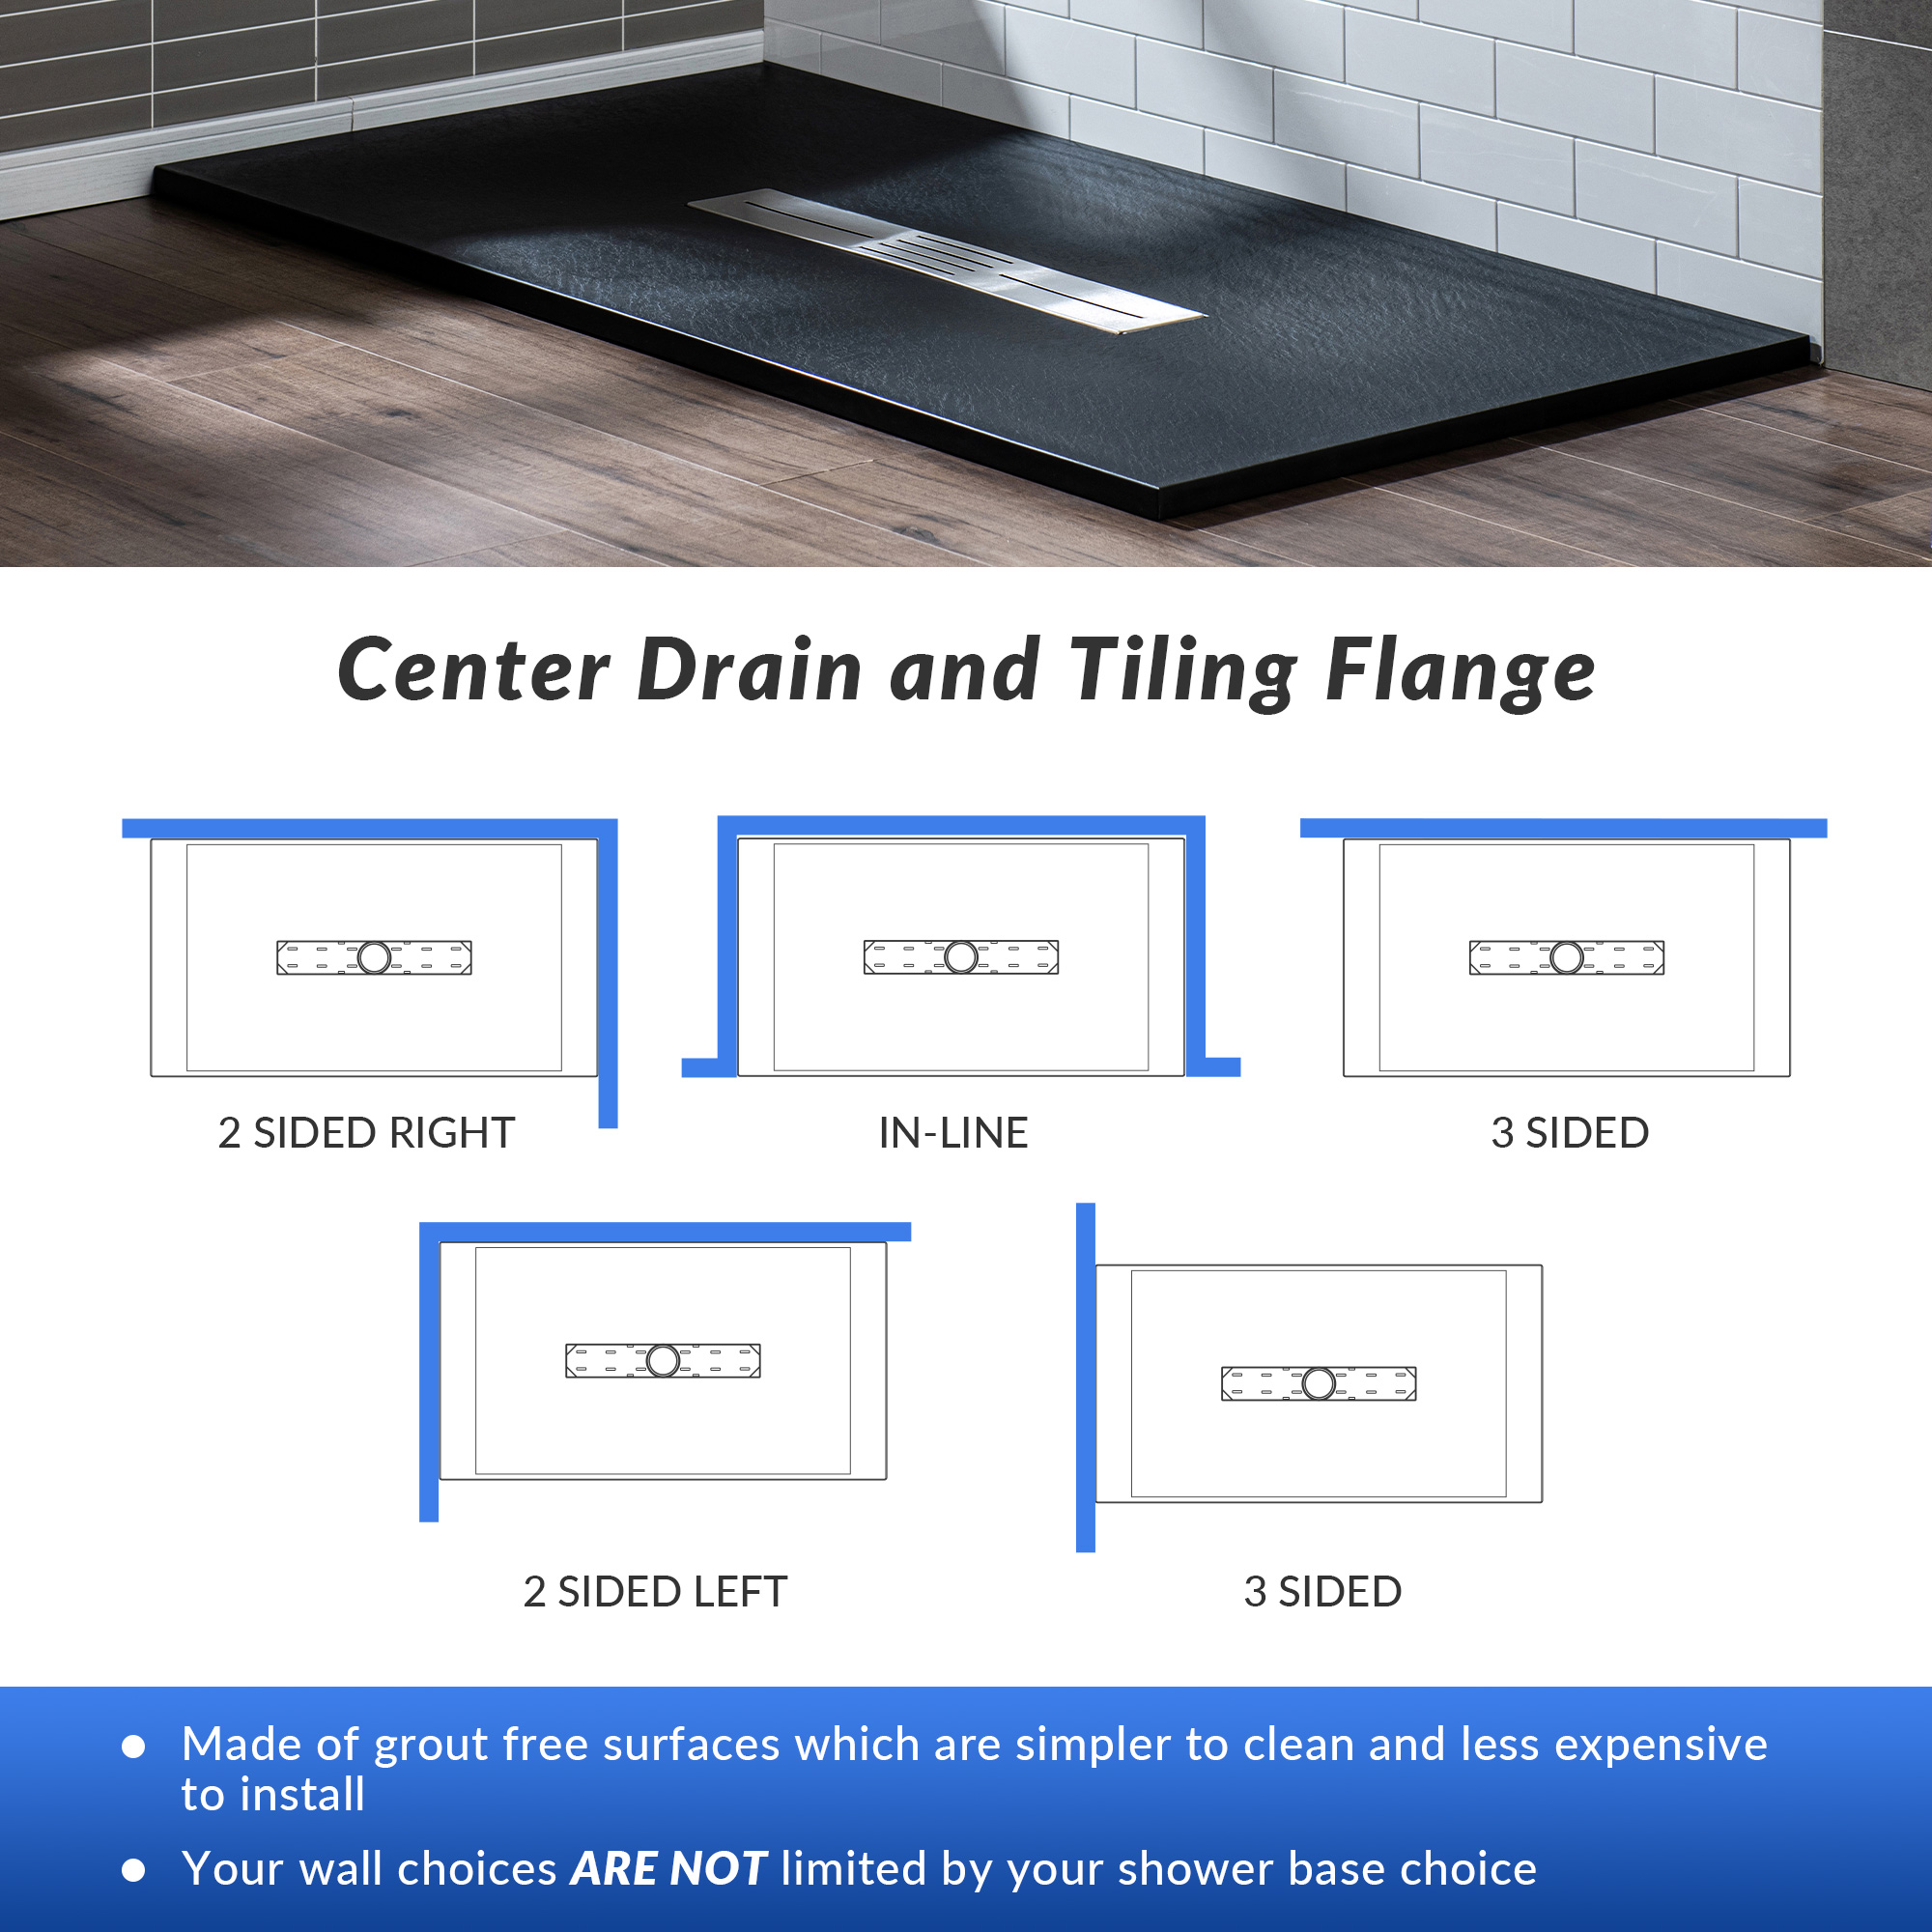  WOODBRIDGE 60-in L x 36-in W Zero Threshold End Drain Shower Base with Center Drain Placement, Matching Decorative Drain Plate and Tile Flange, Wheel Chair Access, Low Profile, Black_15109